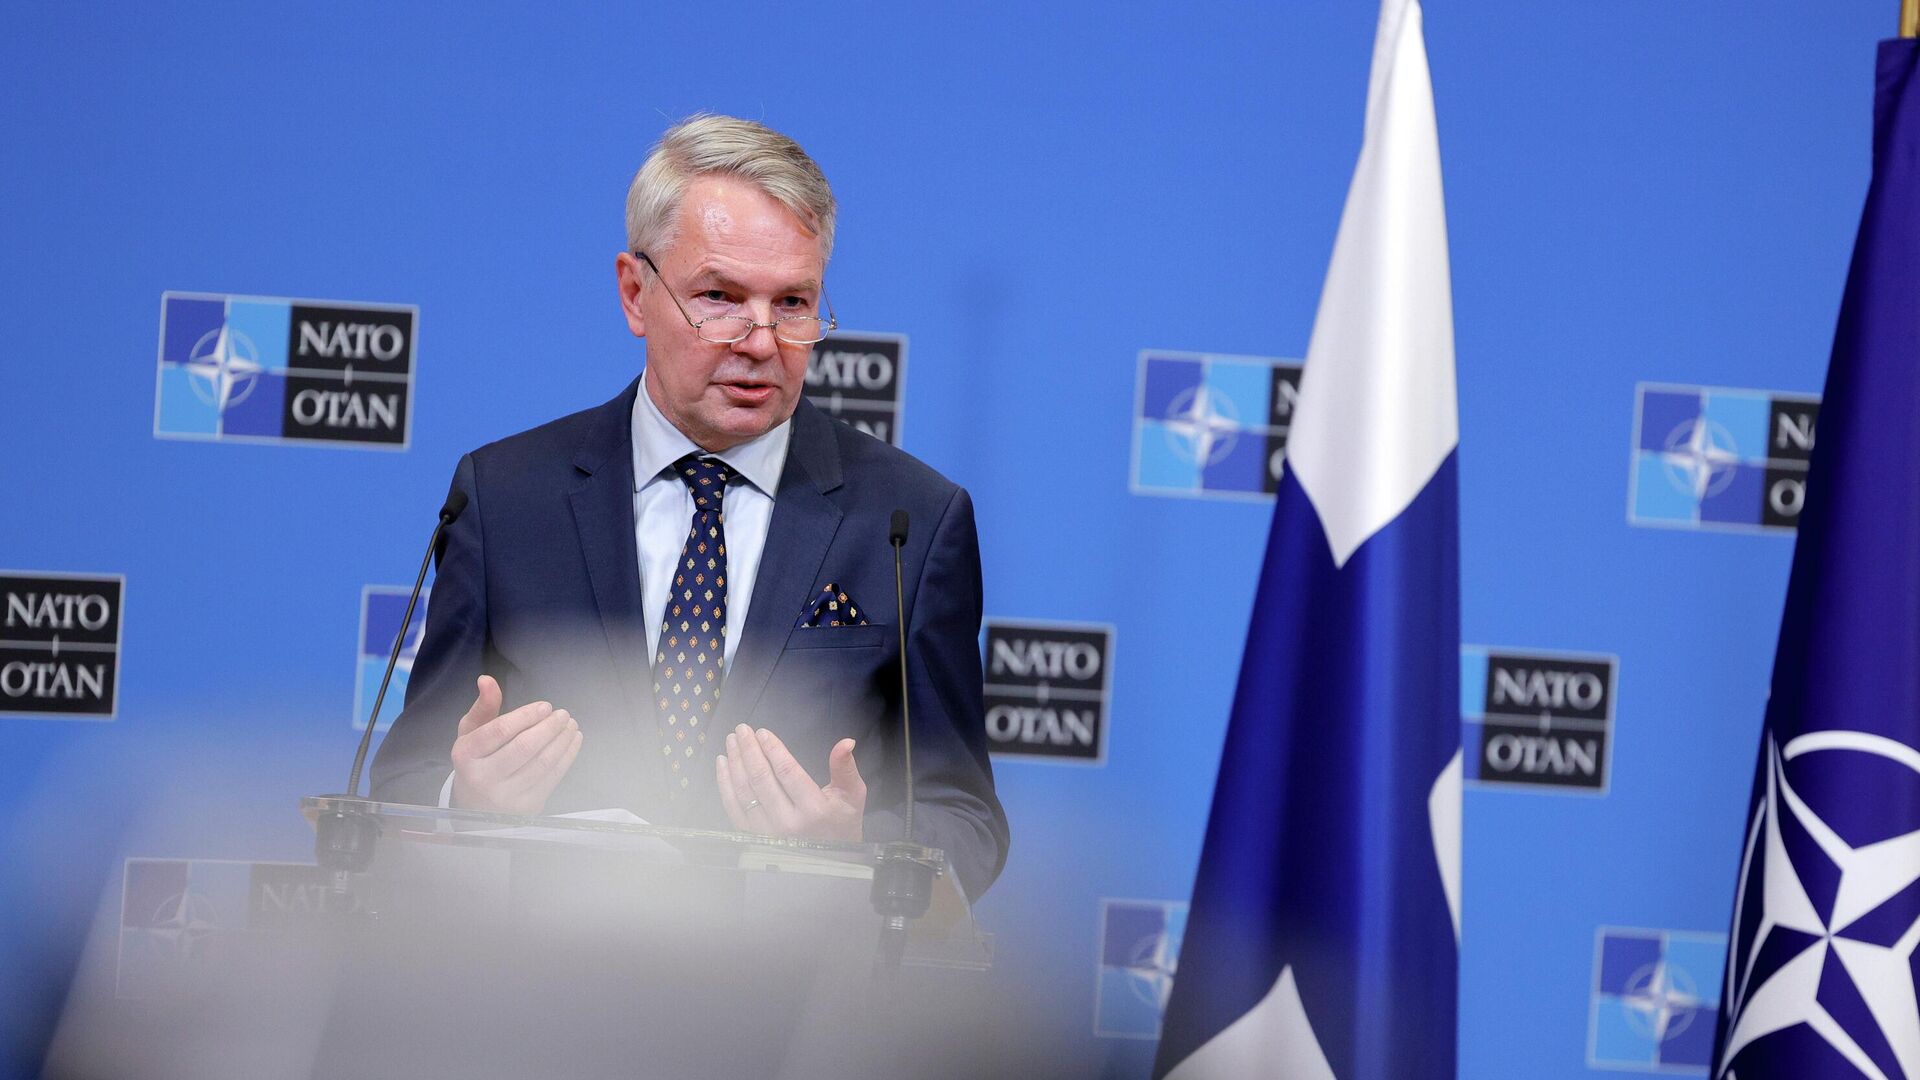 Finland's Foreign Minister Pekka Haavisto speaks during a media conference at NATO headquarters in Brussels, Monday, Jan. 24, 2022. - Sputnik International, 1920, 17.05.2022